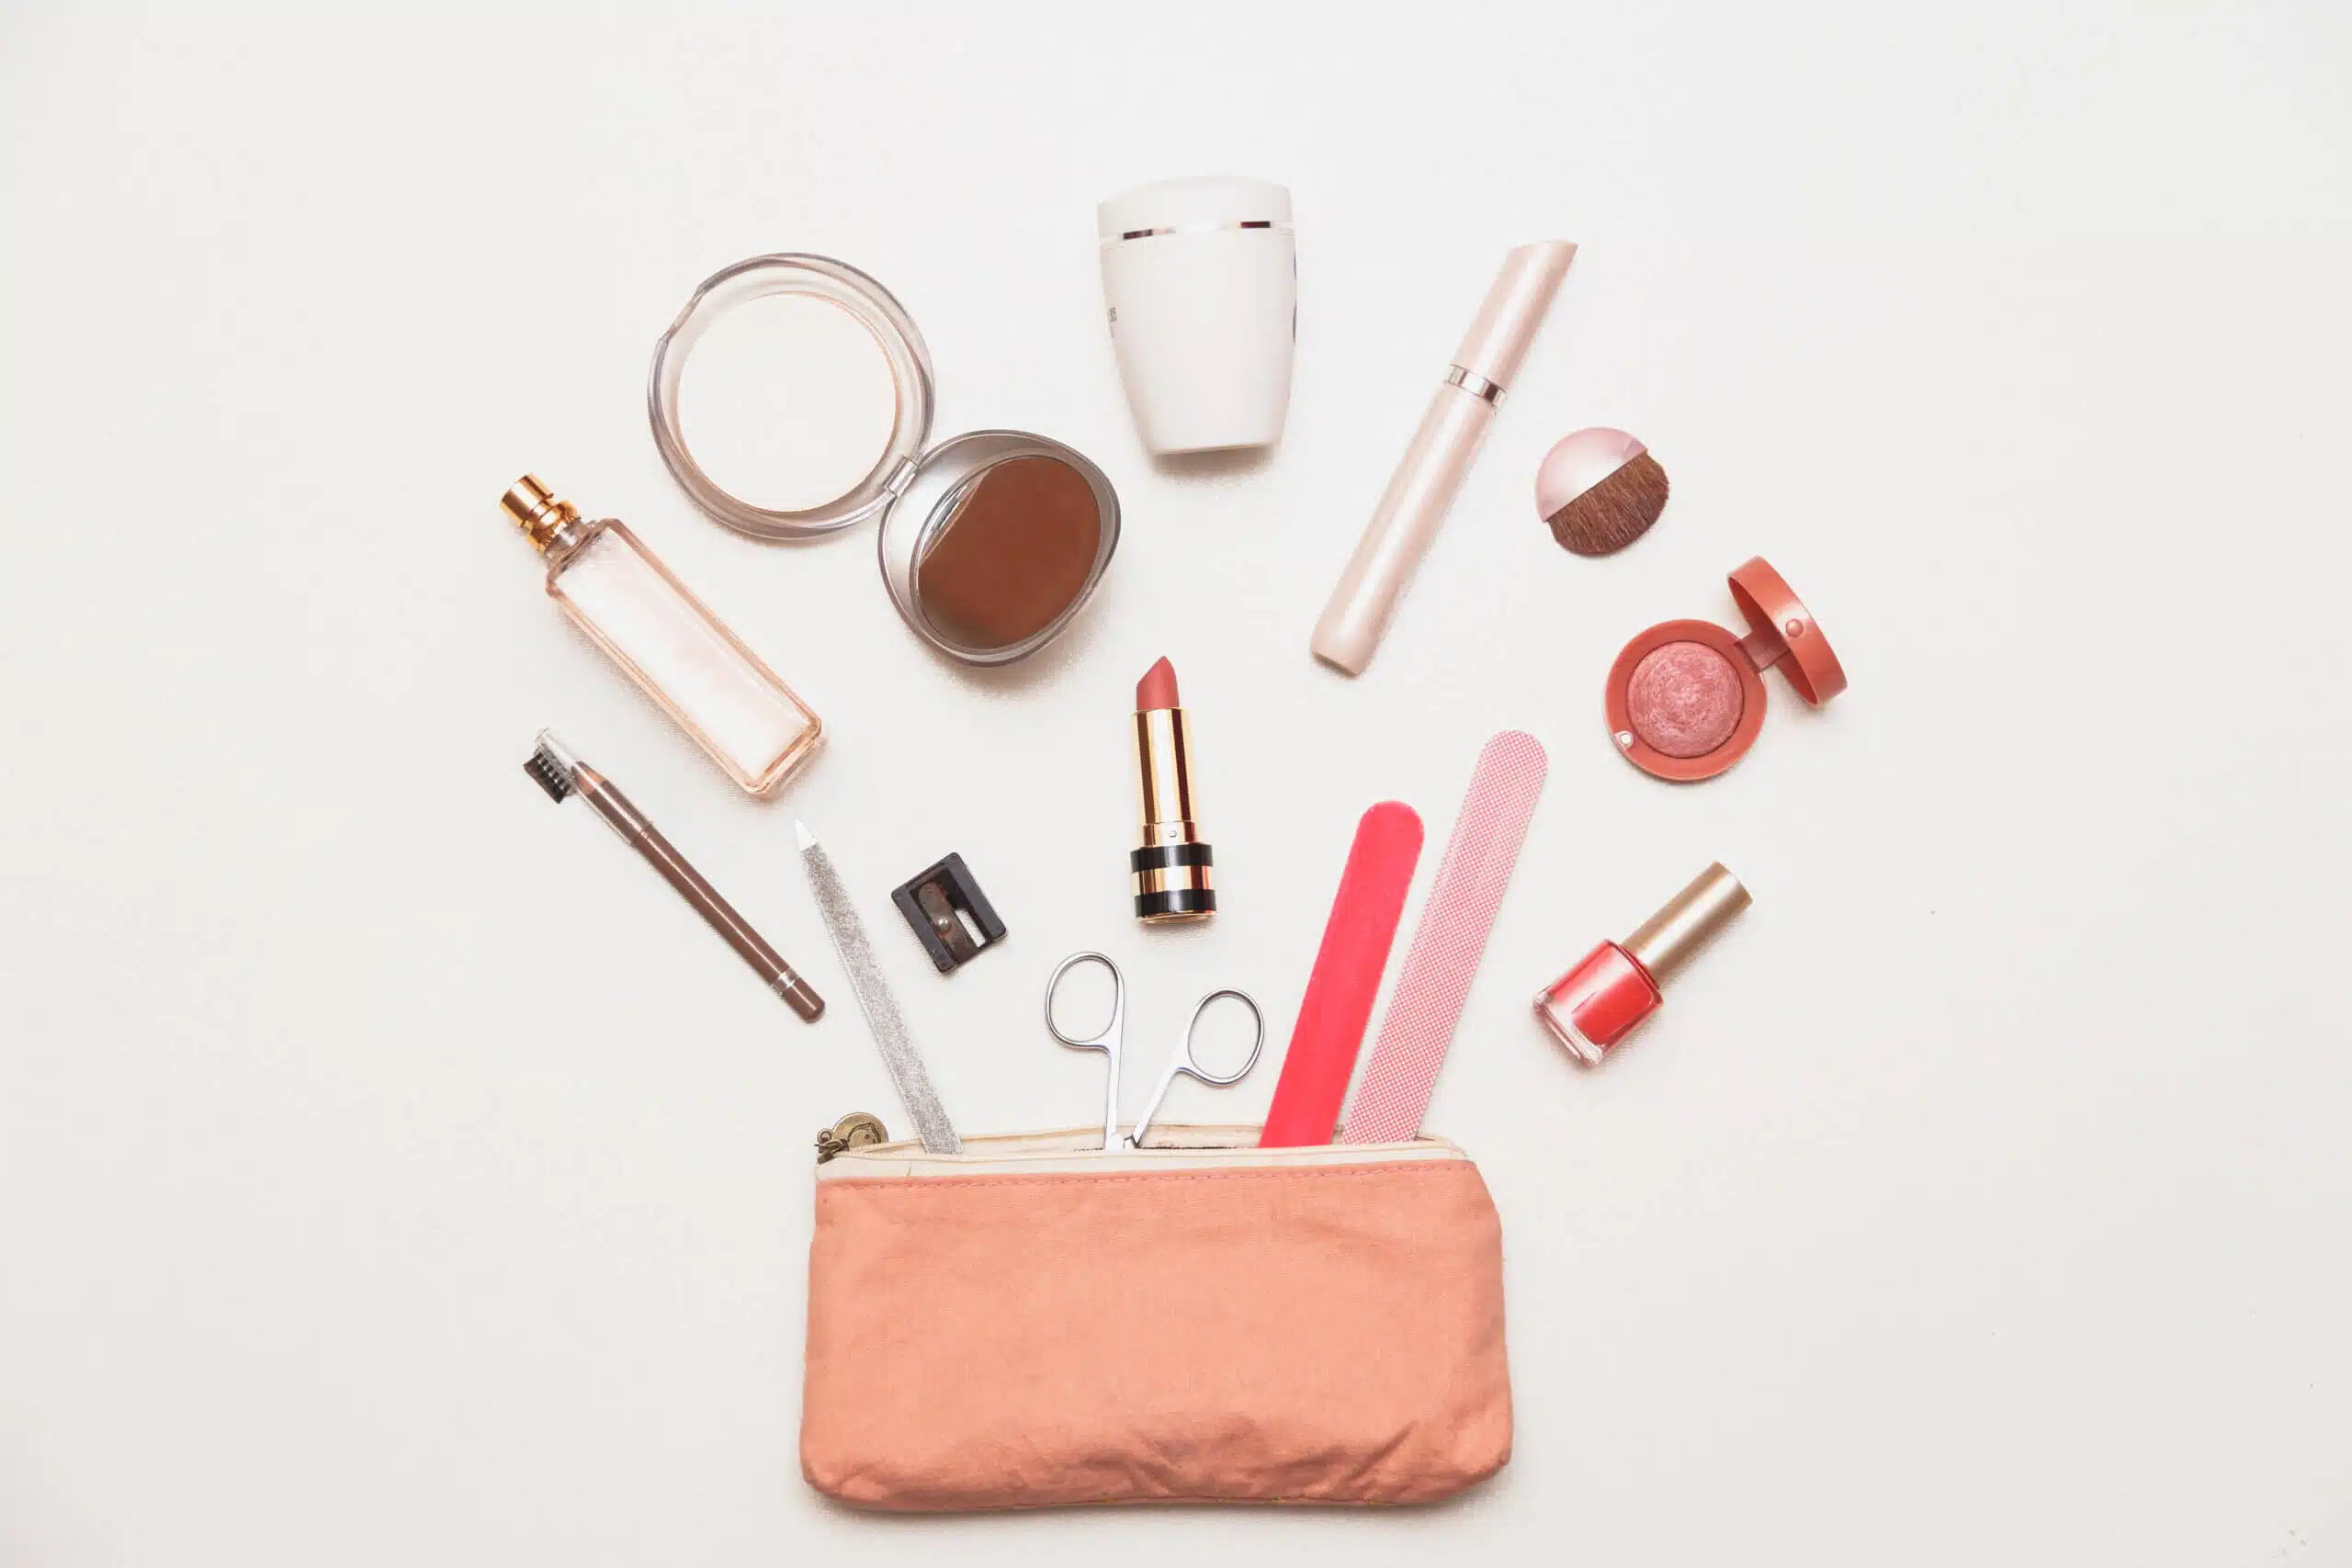 The contents of women's handbags. Make up bag with cosmetics. Top flat view of beauty accessories costmetics